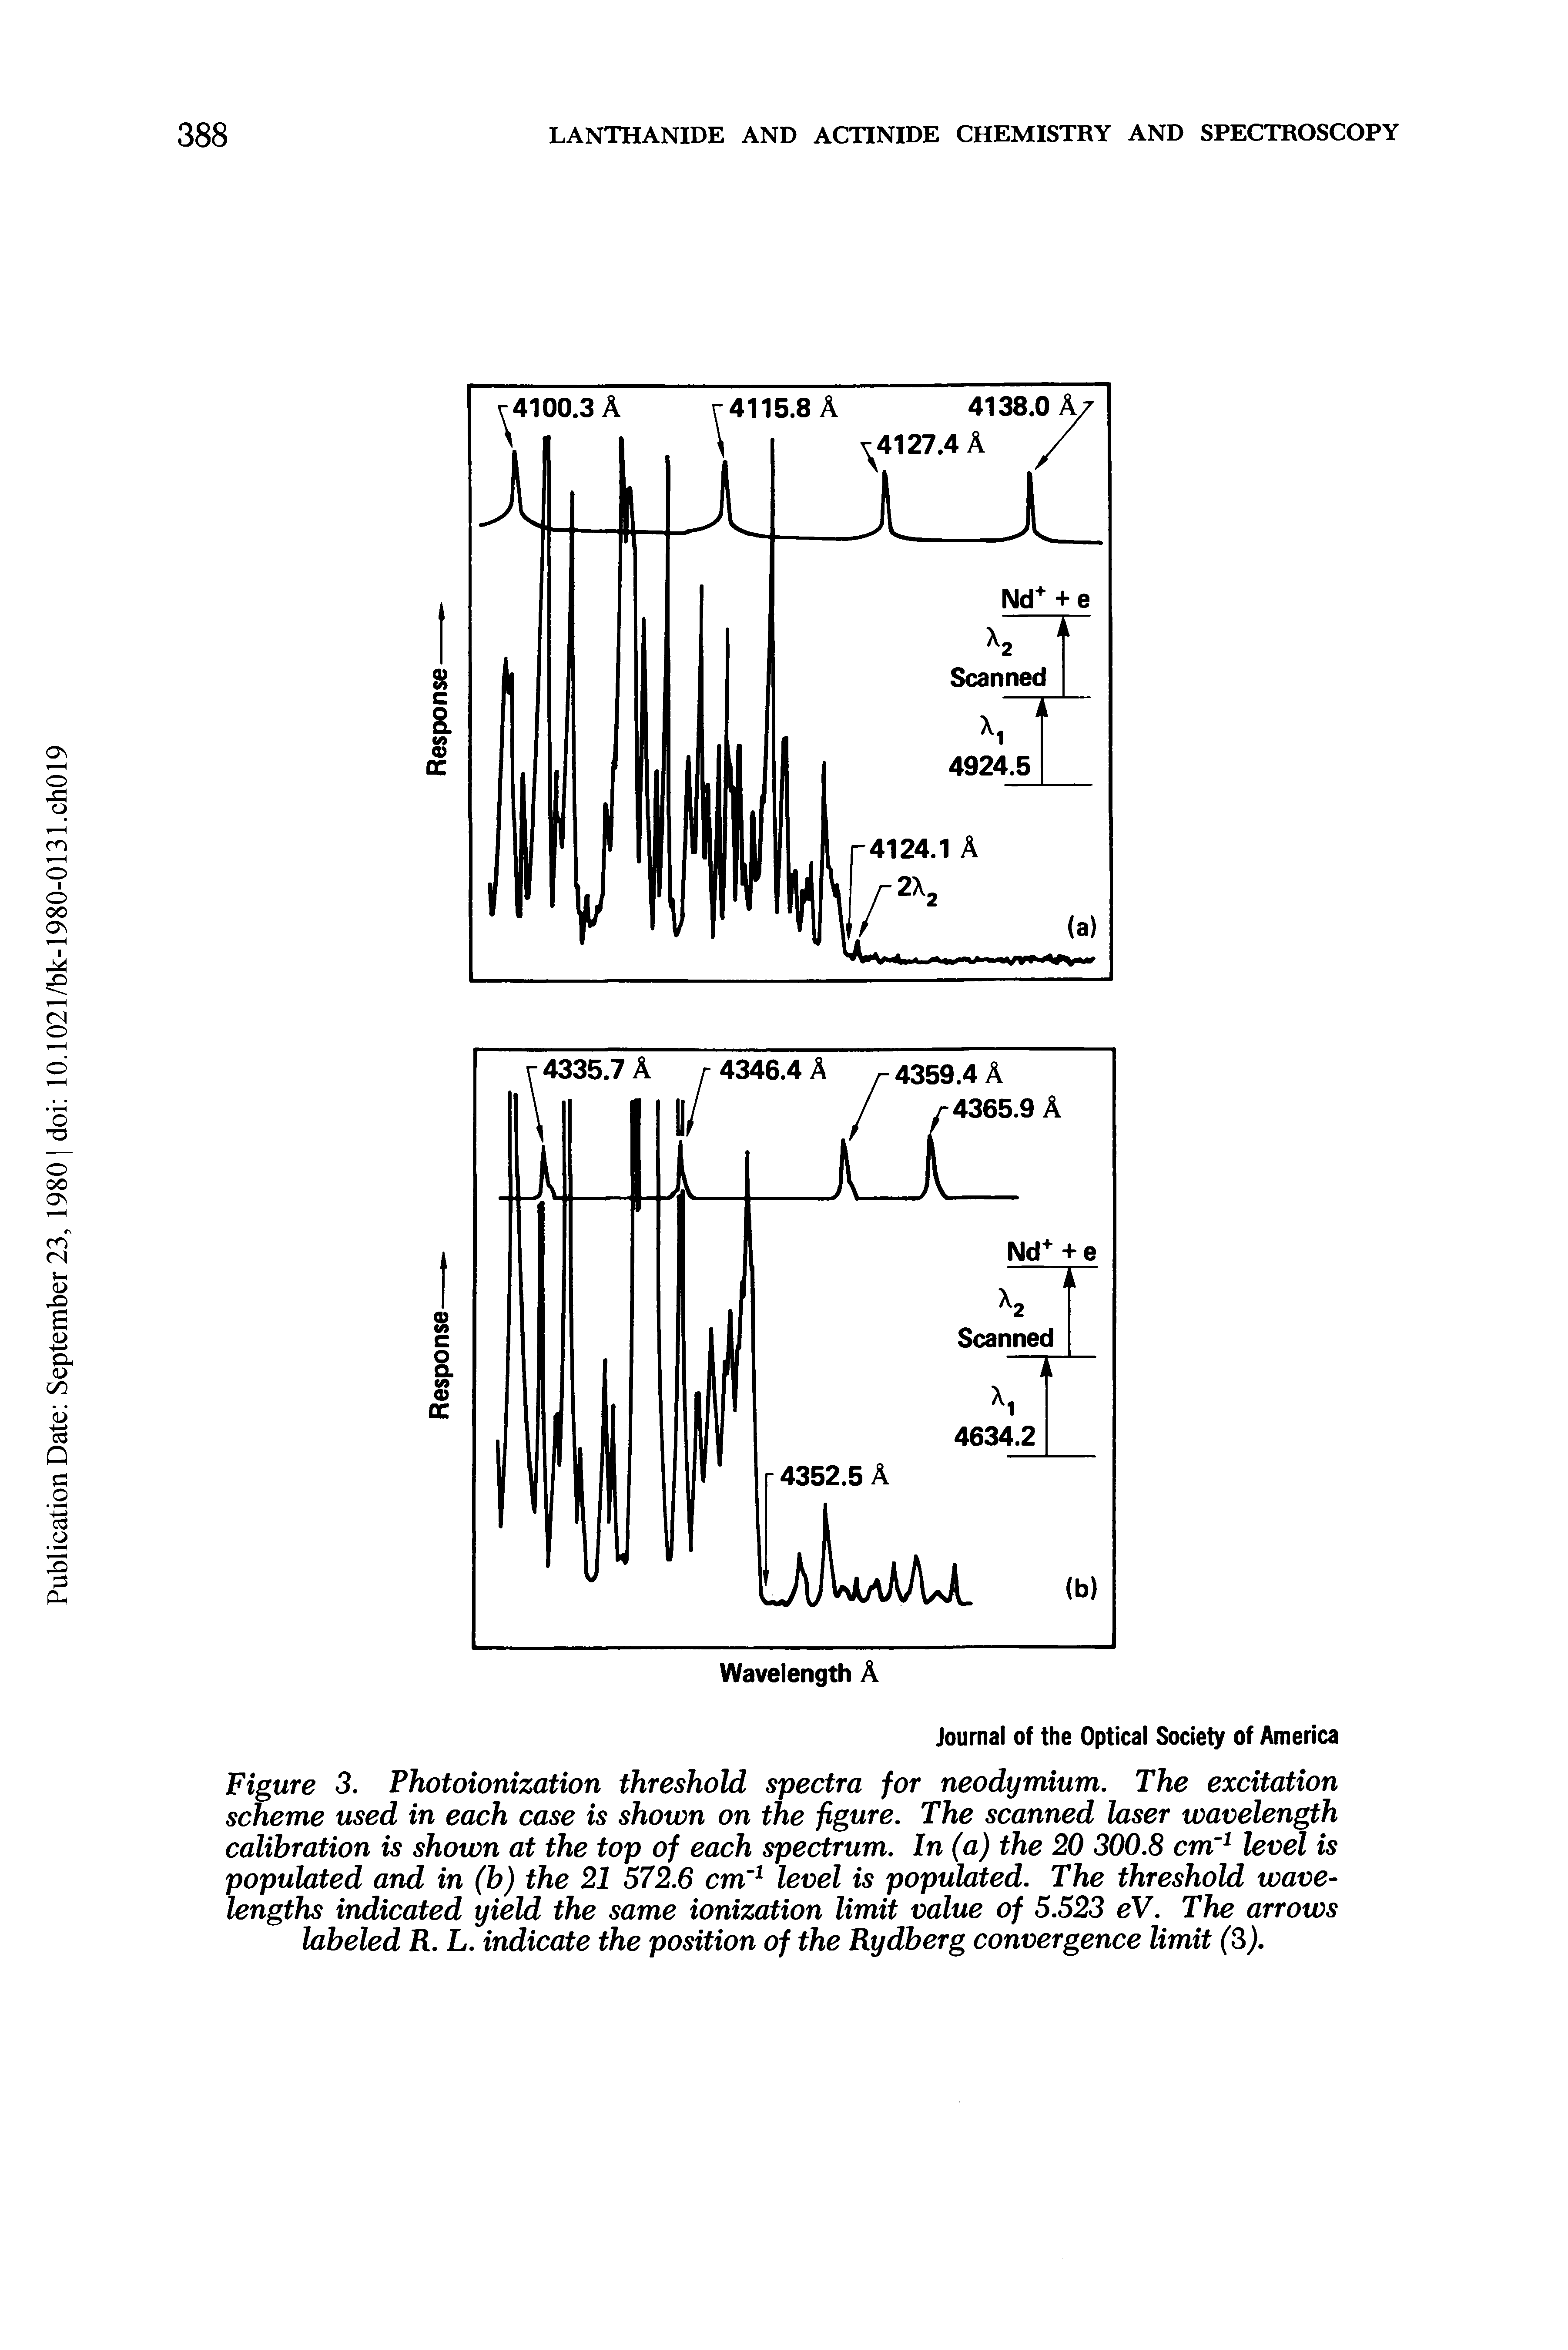 Figure 3. Photoionization threshold spectra for neodymium. The excitation scheme used in each case is shown on the figure. The scanned laser wavelength calibration is shown at the top of each spectrum. In (a) the 20 300.8 cm 1 level is populated and in (b) the 21 572.6 cm 1 level is populated. The threshold wavelengths indicated yield the same ionization limit value of 5.523 eV. The arrows labeled R. L. indicate the position of the Rydberg convergence limit (3).